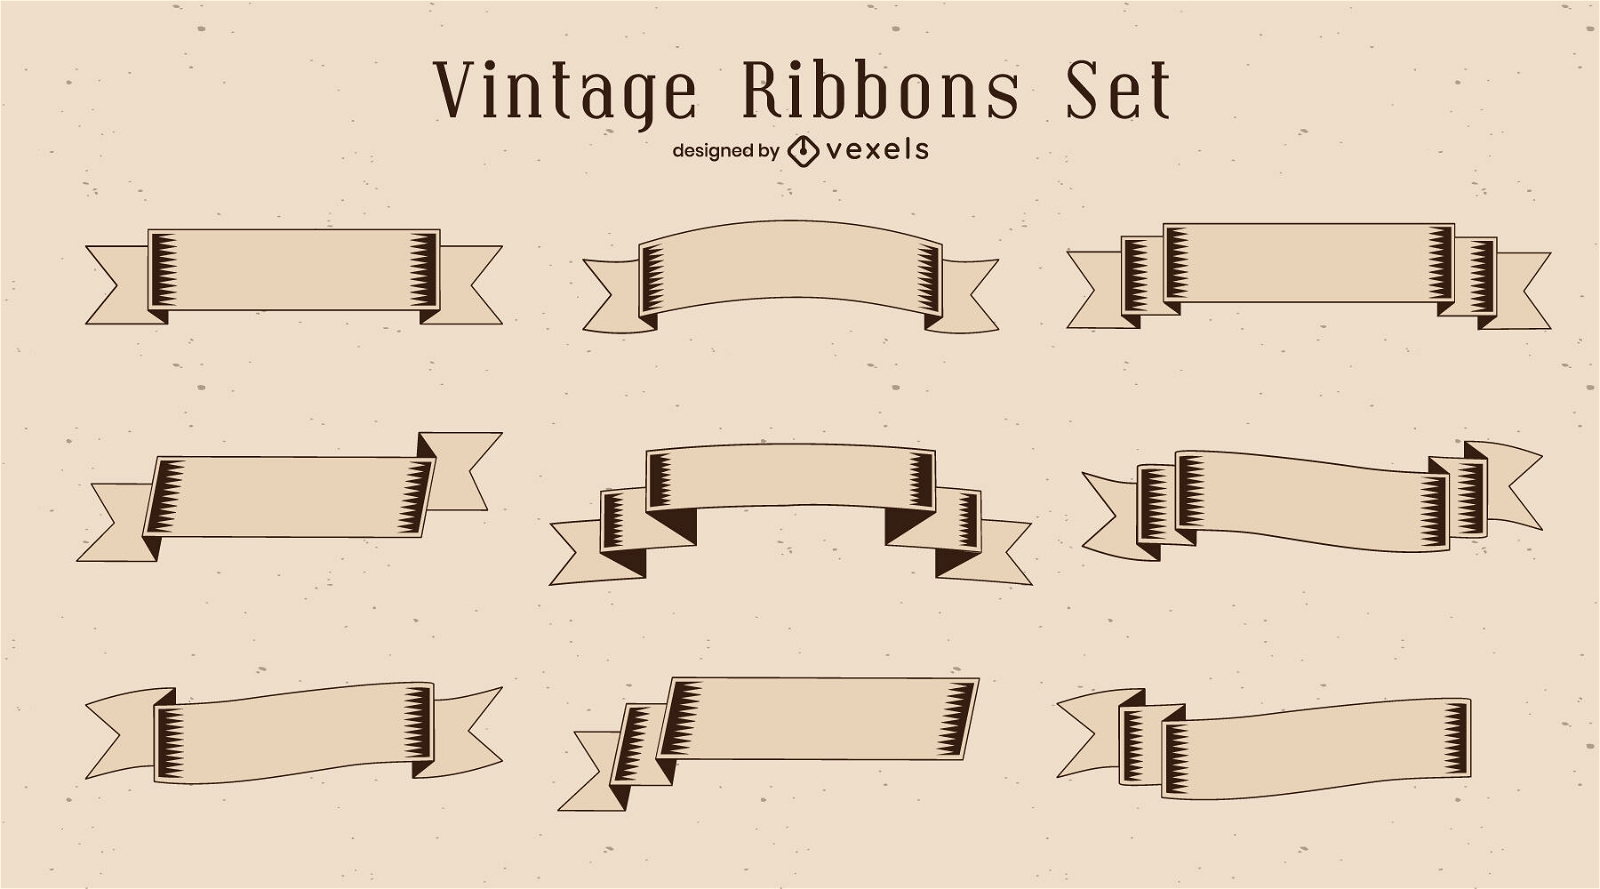 Collection of vintage ribbons Royalty Free Vector Image